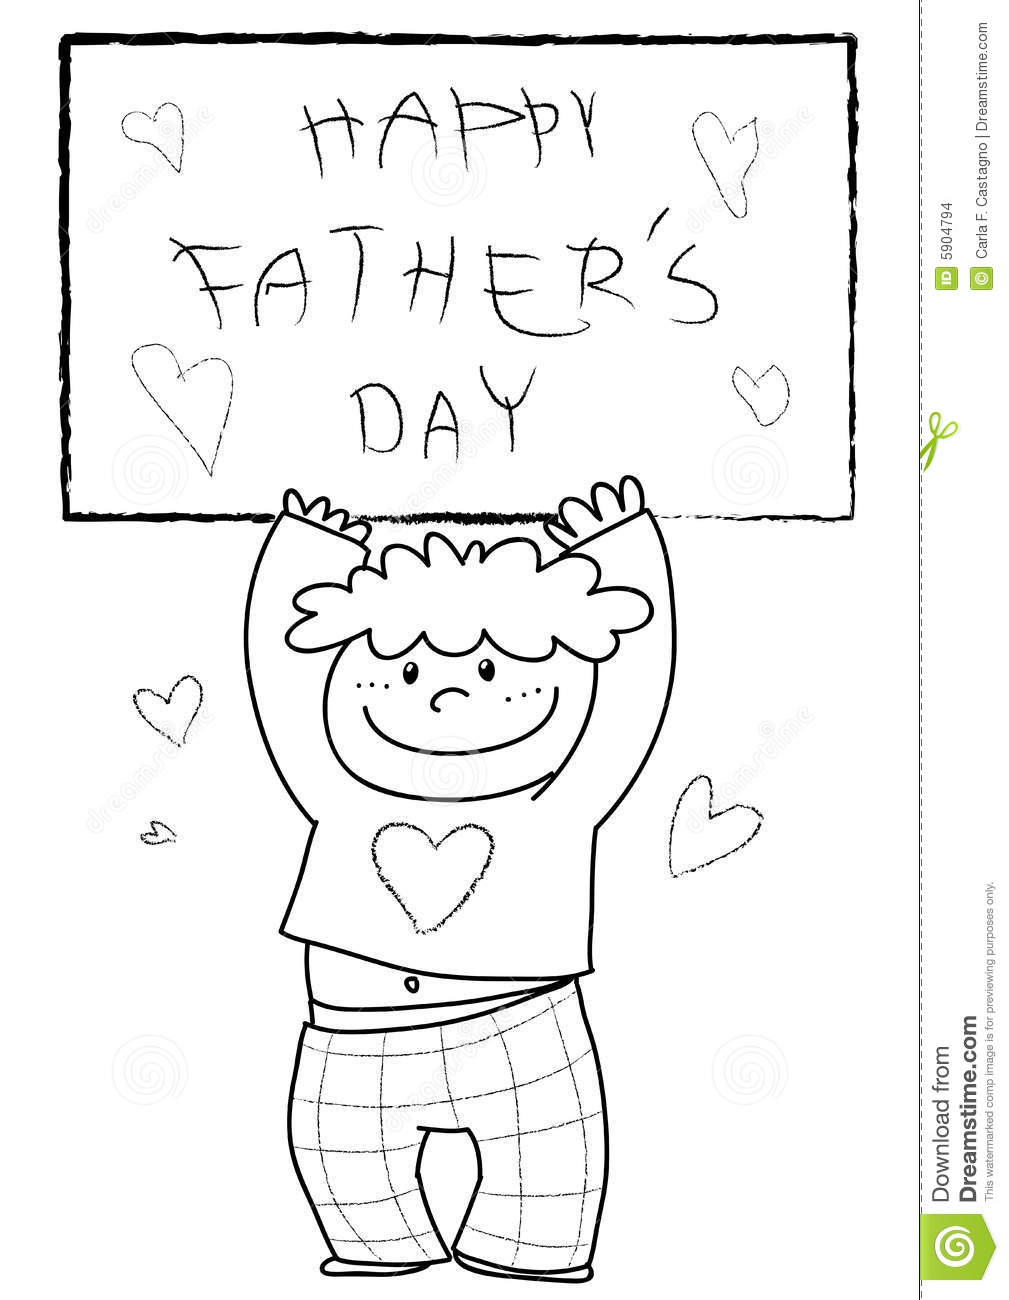 Boy Wishing Happy Father S Day  Black And White Vector Illustration